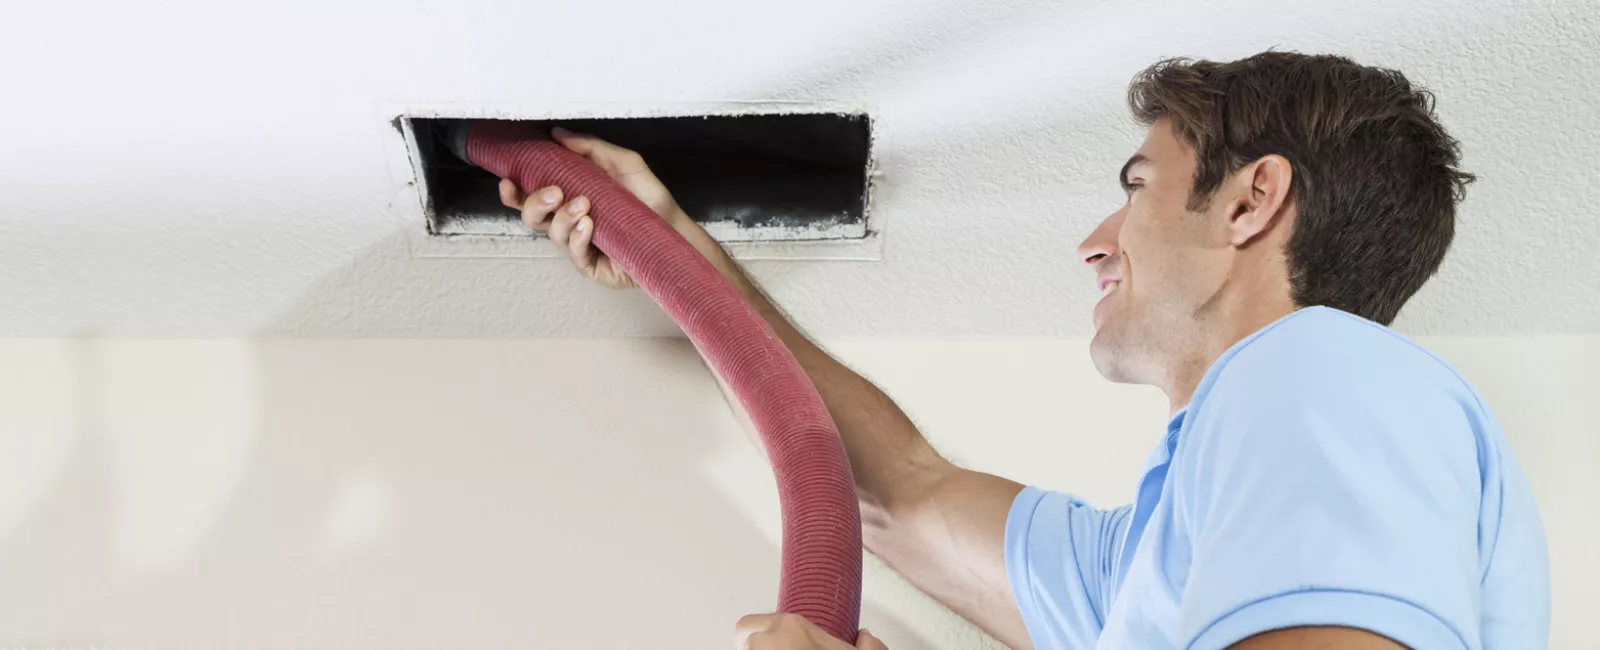  Duct Cleaning Services Near Me in The Woodlands TX